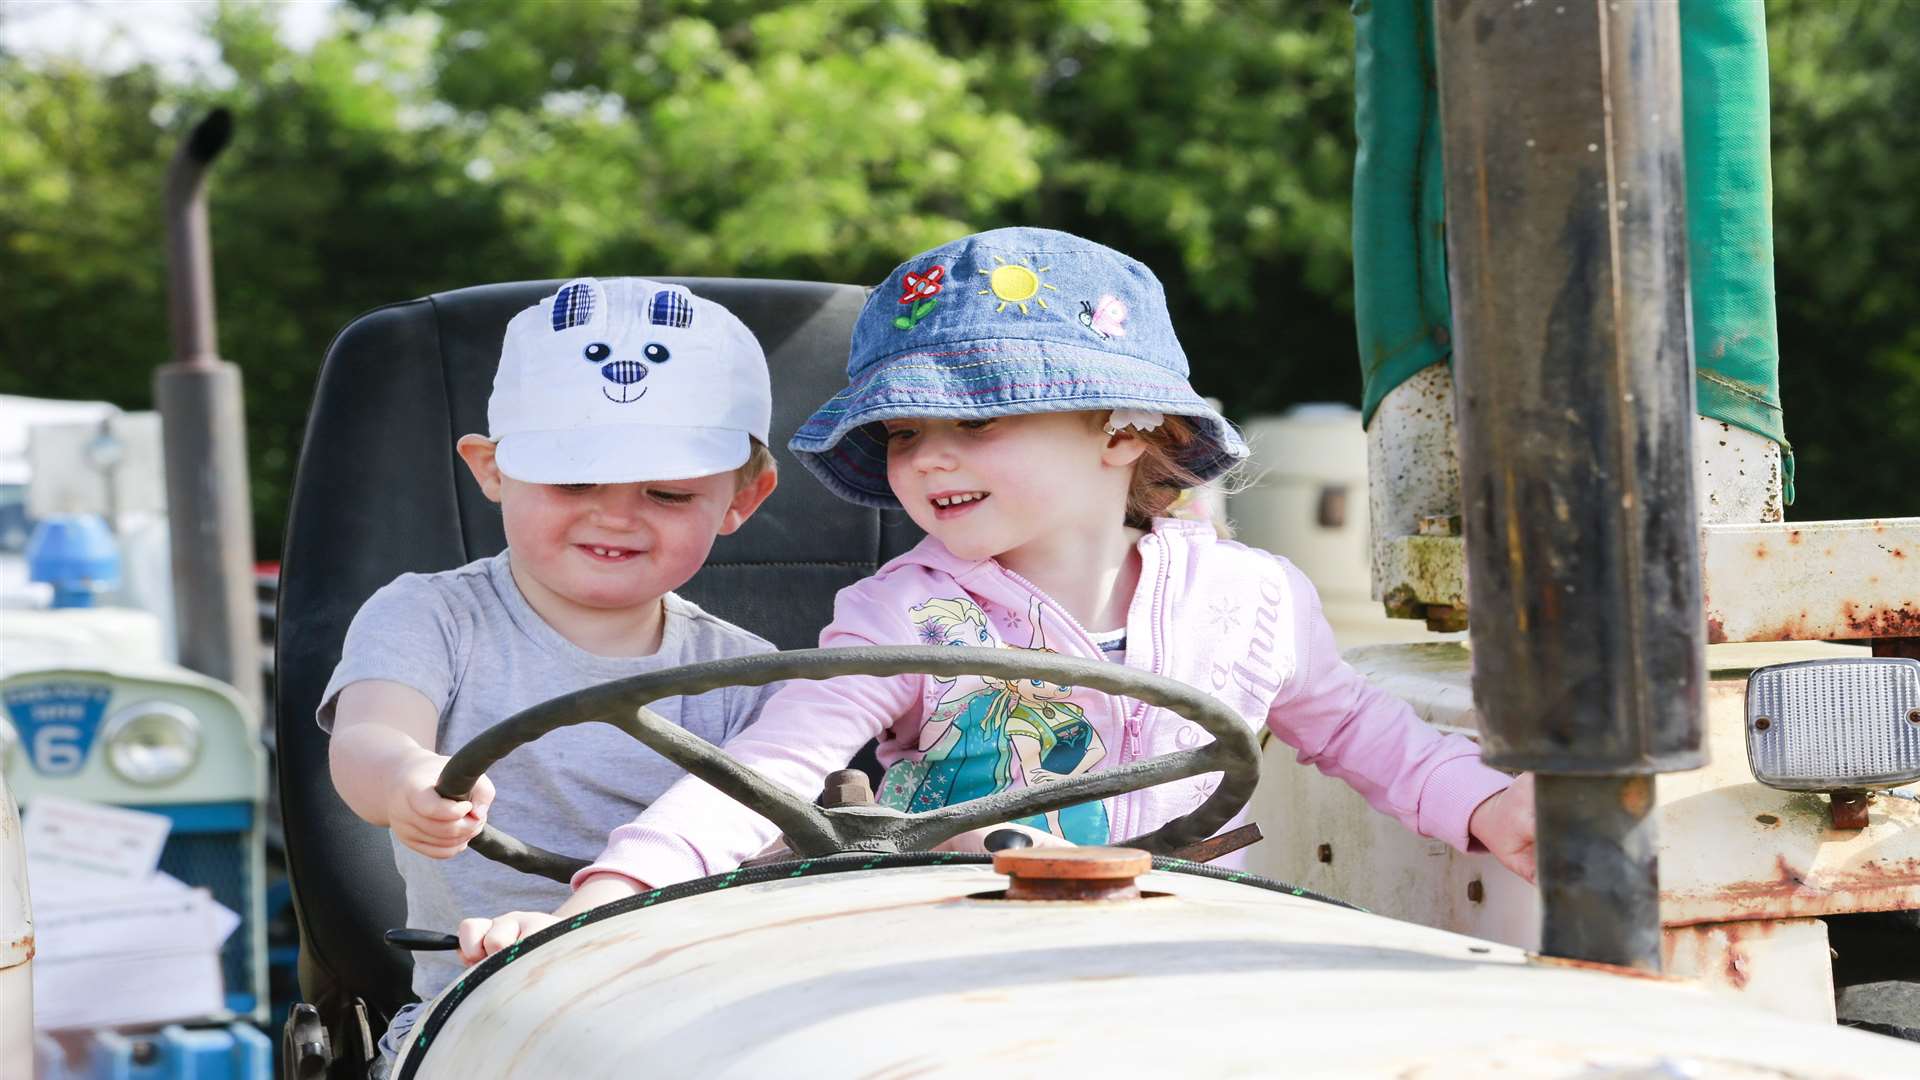 There will be plenty of farming machines to discover at the Tractorfest, as Kade and Rose Ash found out last year. Picture: Martin Apps